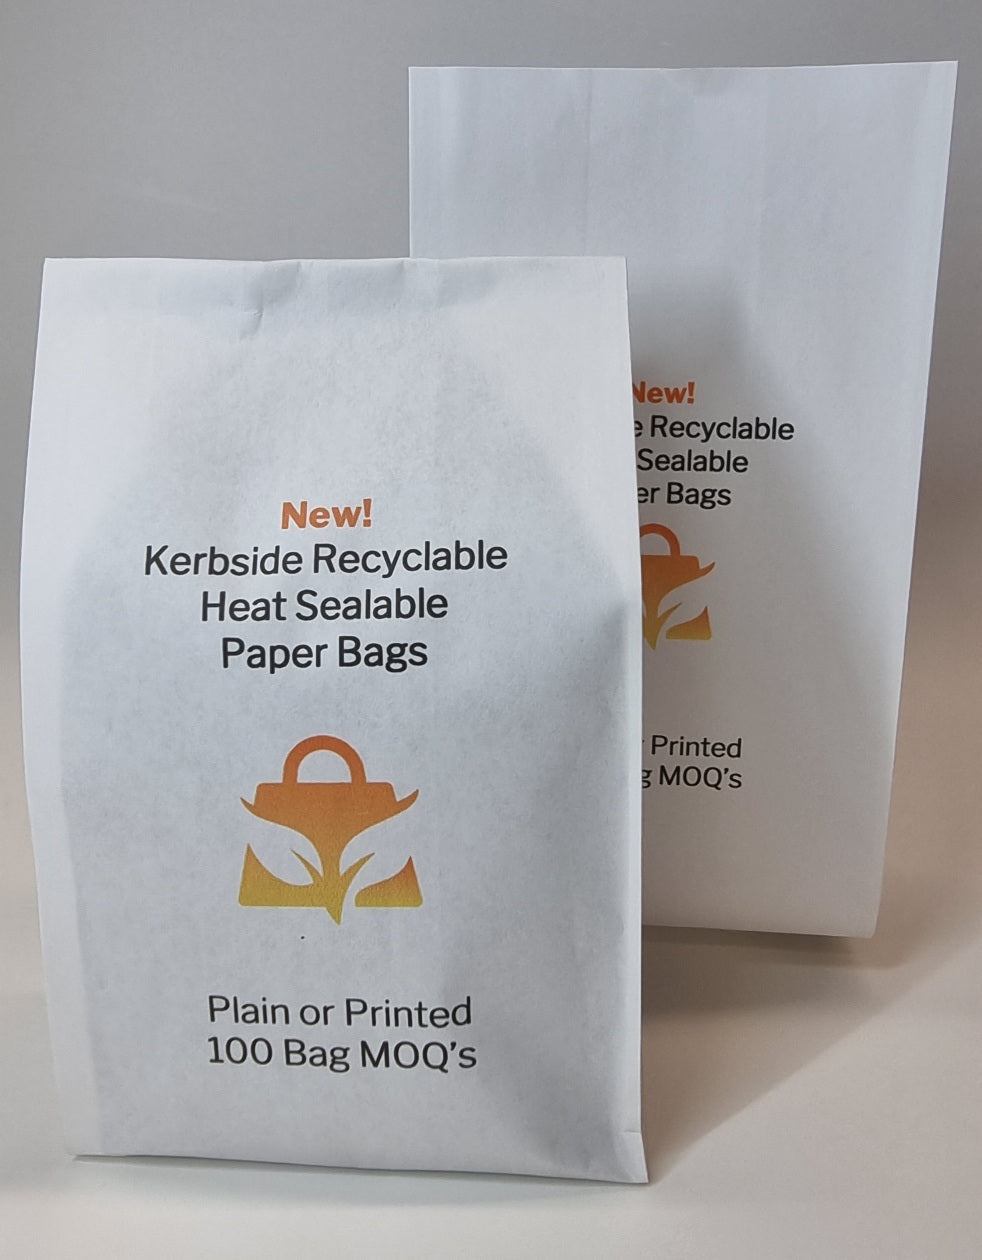 Custom Print EmberPack™ Dry Goods 250g Recyclable Paper Bag: Sample Pack Packing Materials EmberPack by EAM 